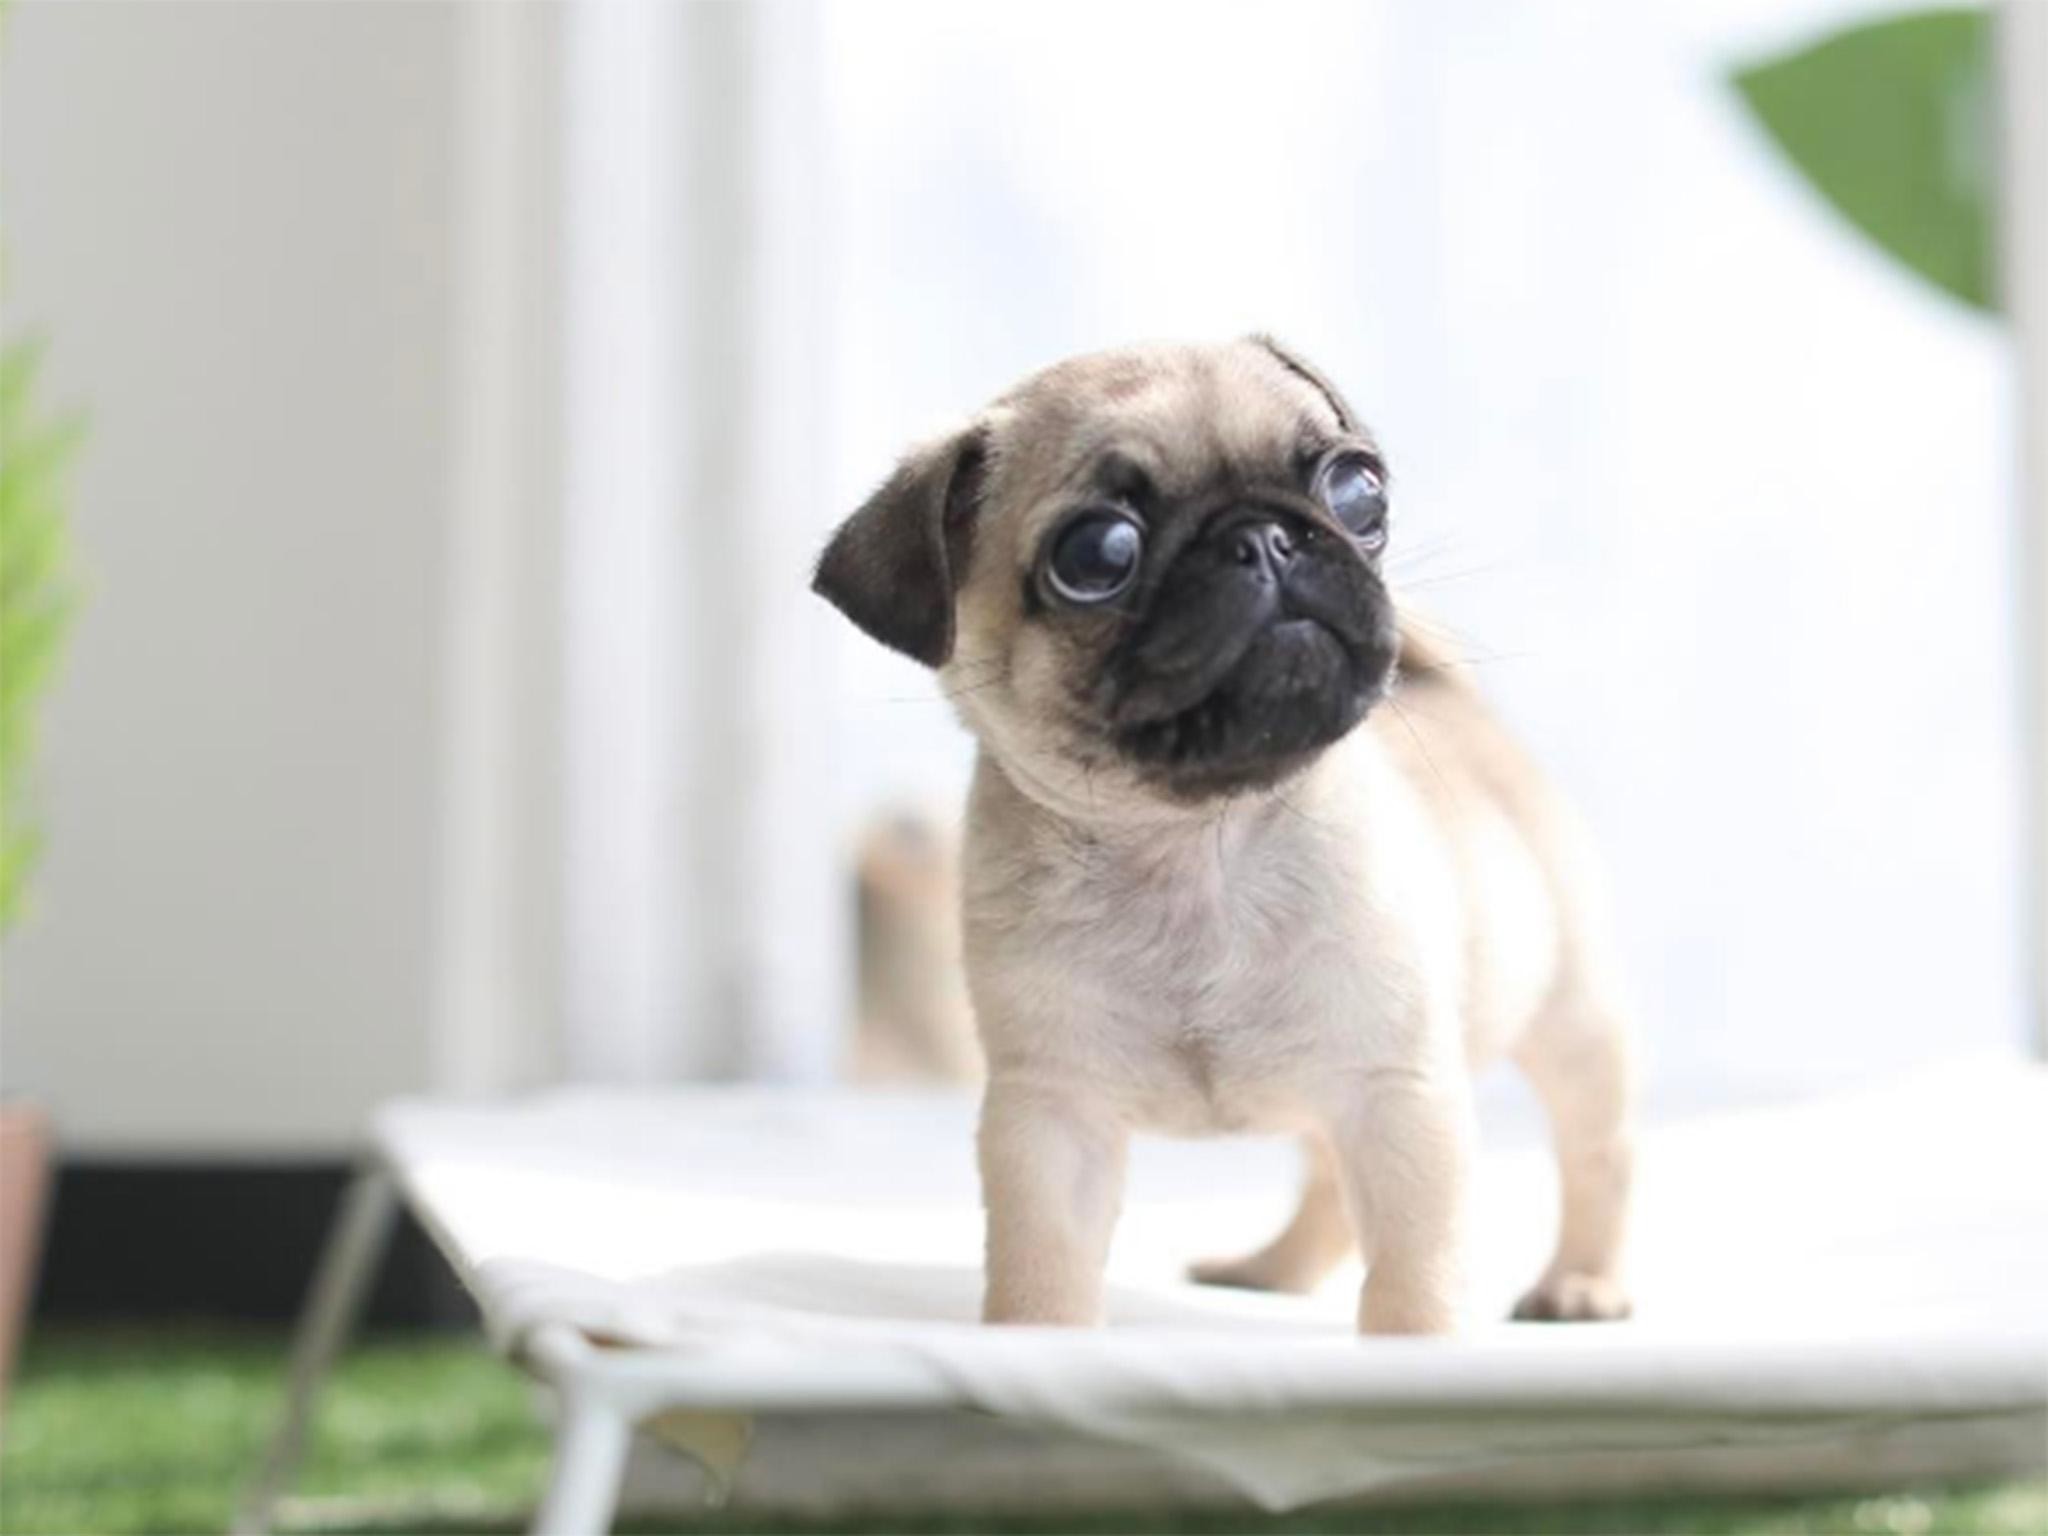 2048x1536 Dog welfare groups warn teacup puppy craze is harmful to pets | The  Independent